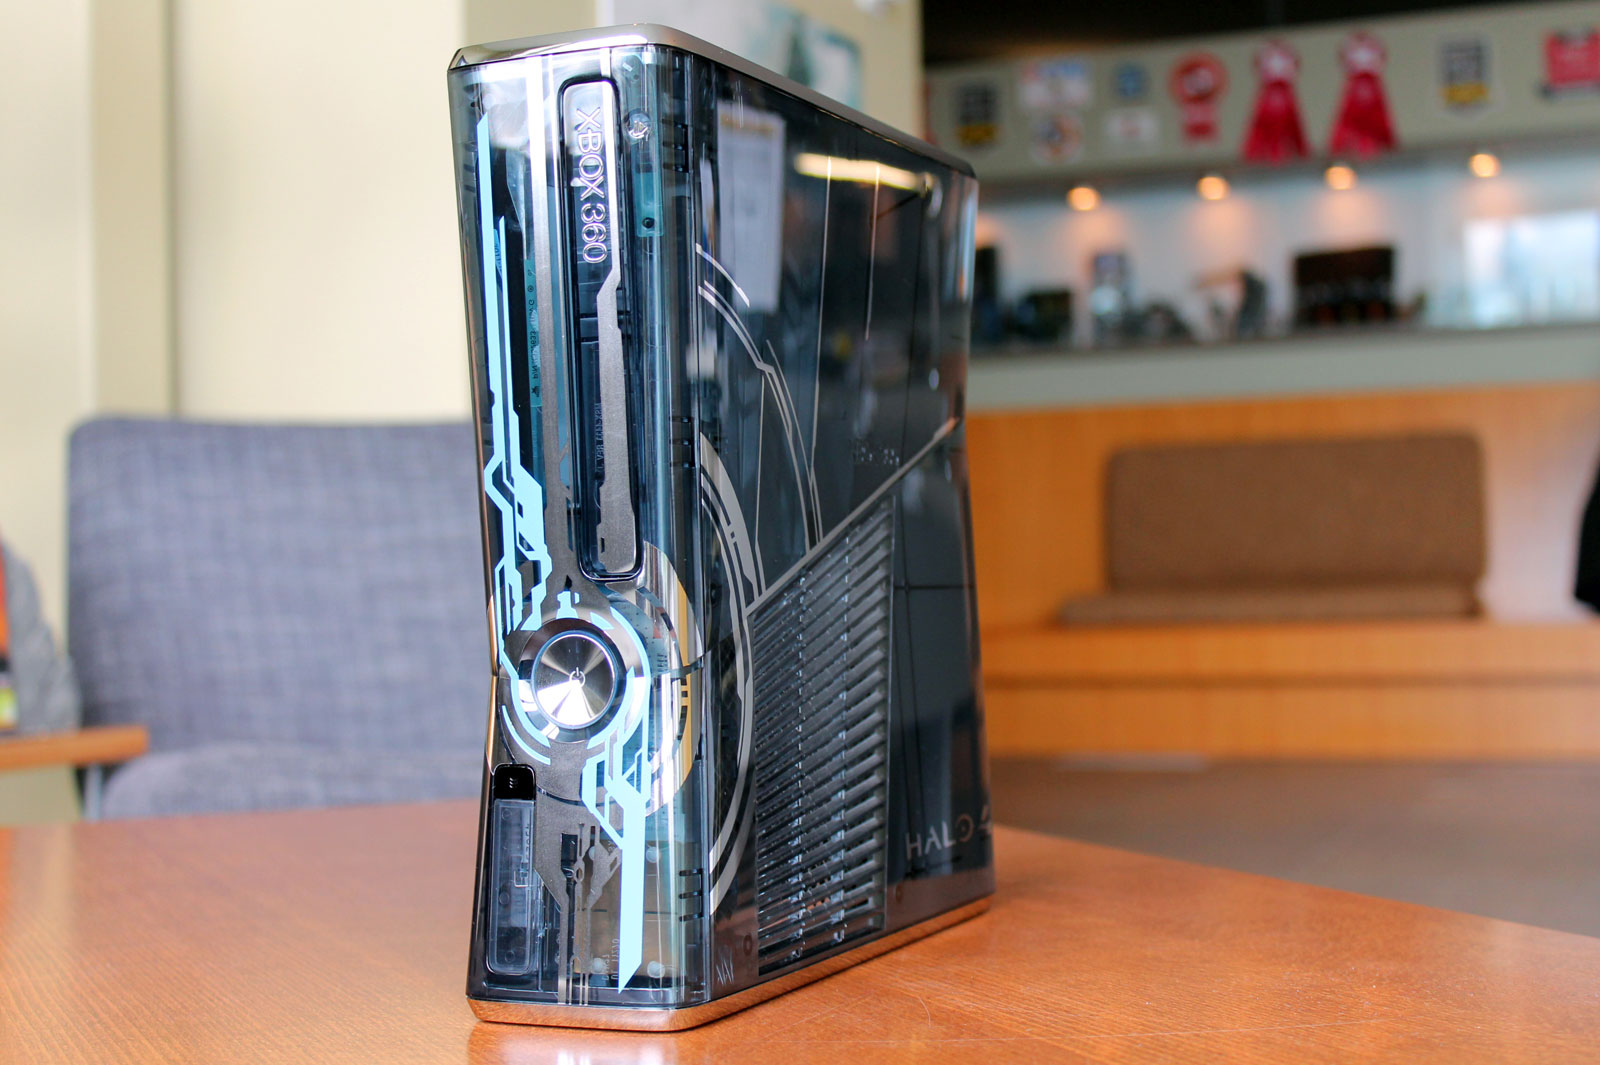 xbox 360 halo 4 limited edition